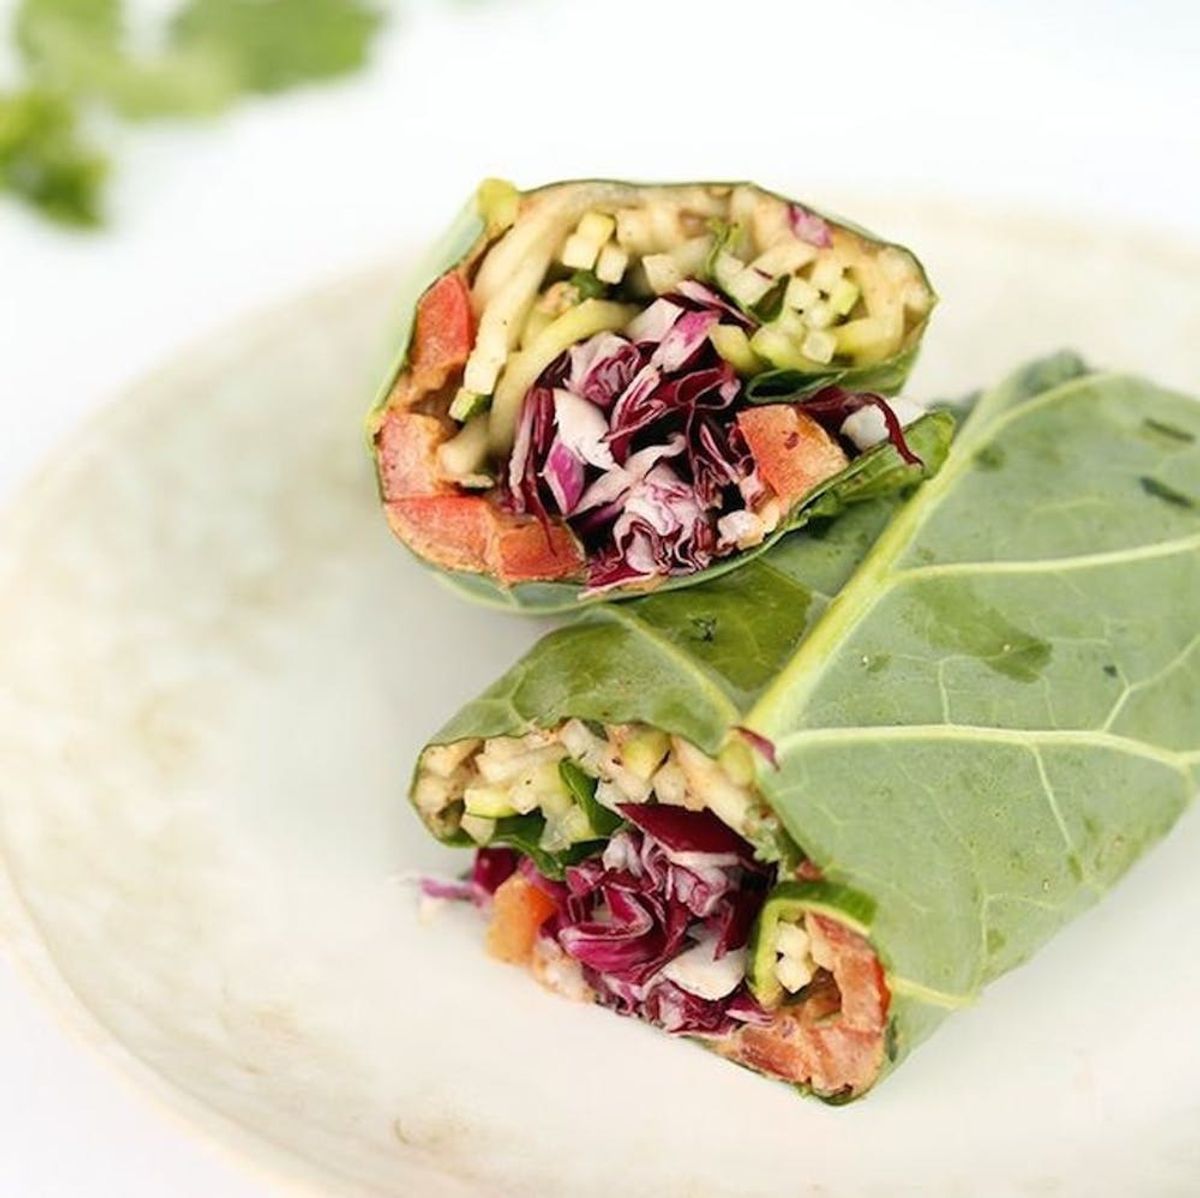 Wrapper’s Delight: 11 New Ways to Add Greens to Your Lunch